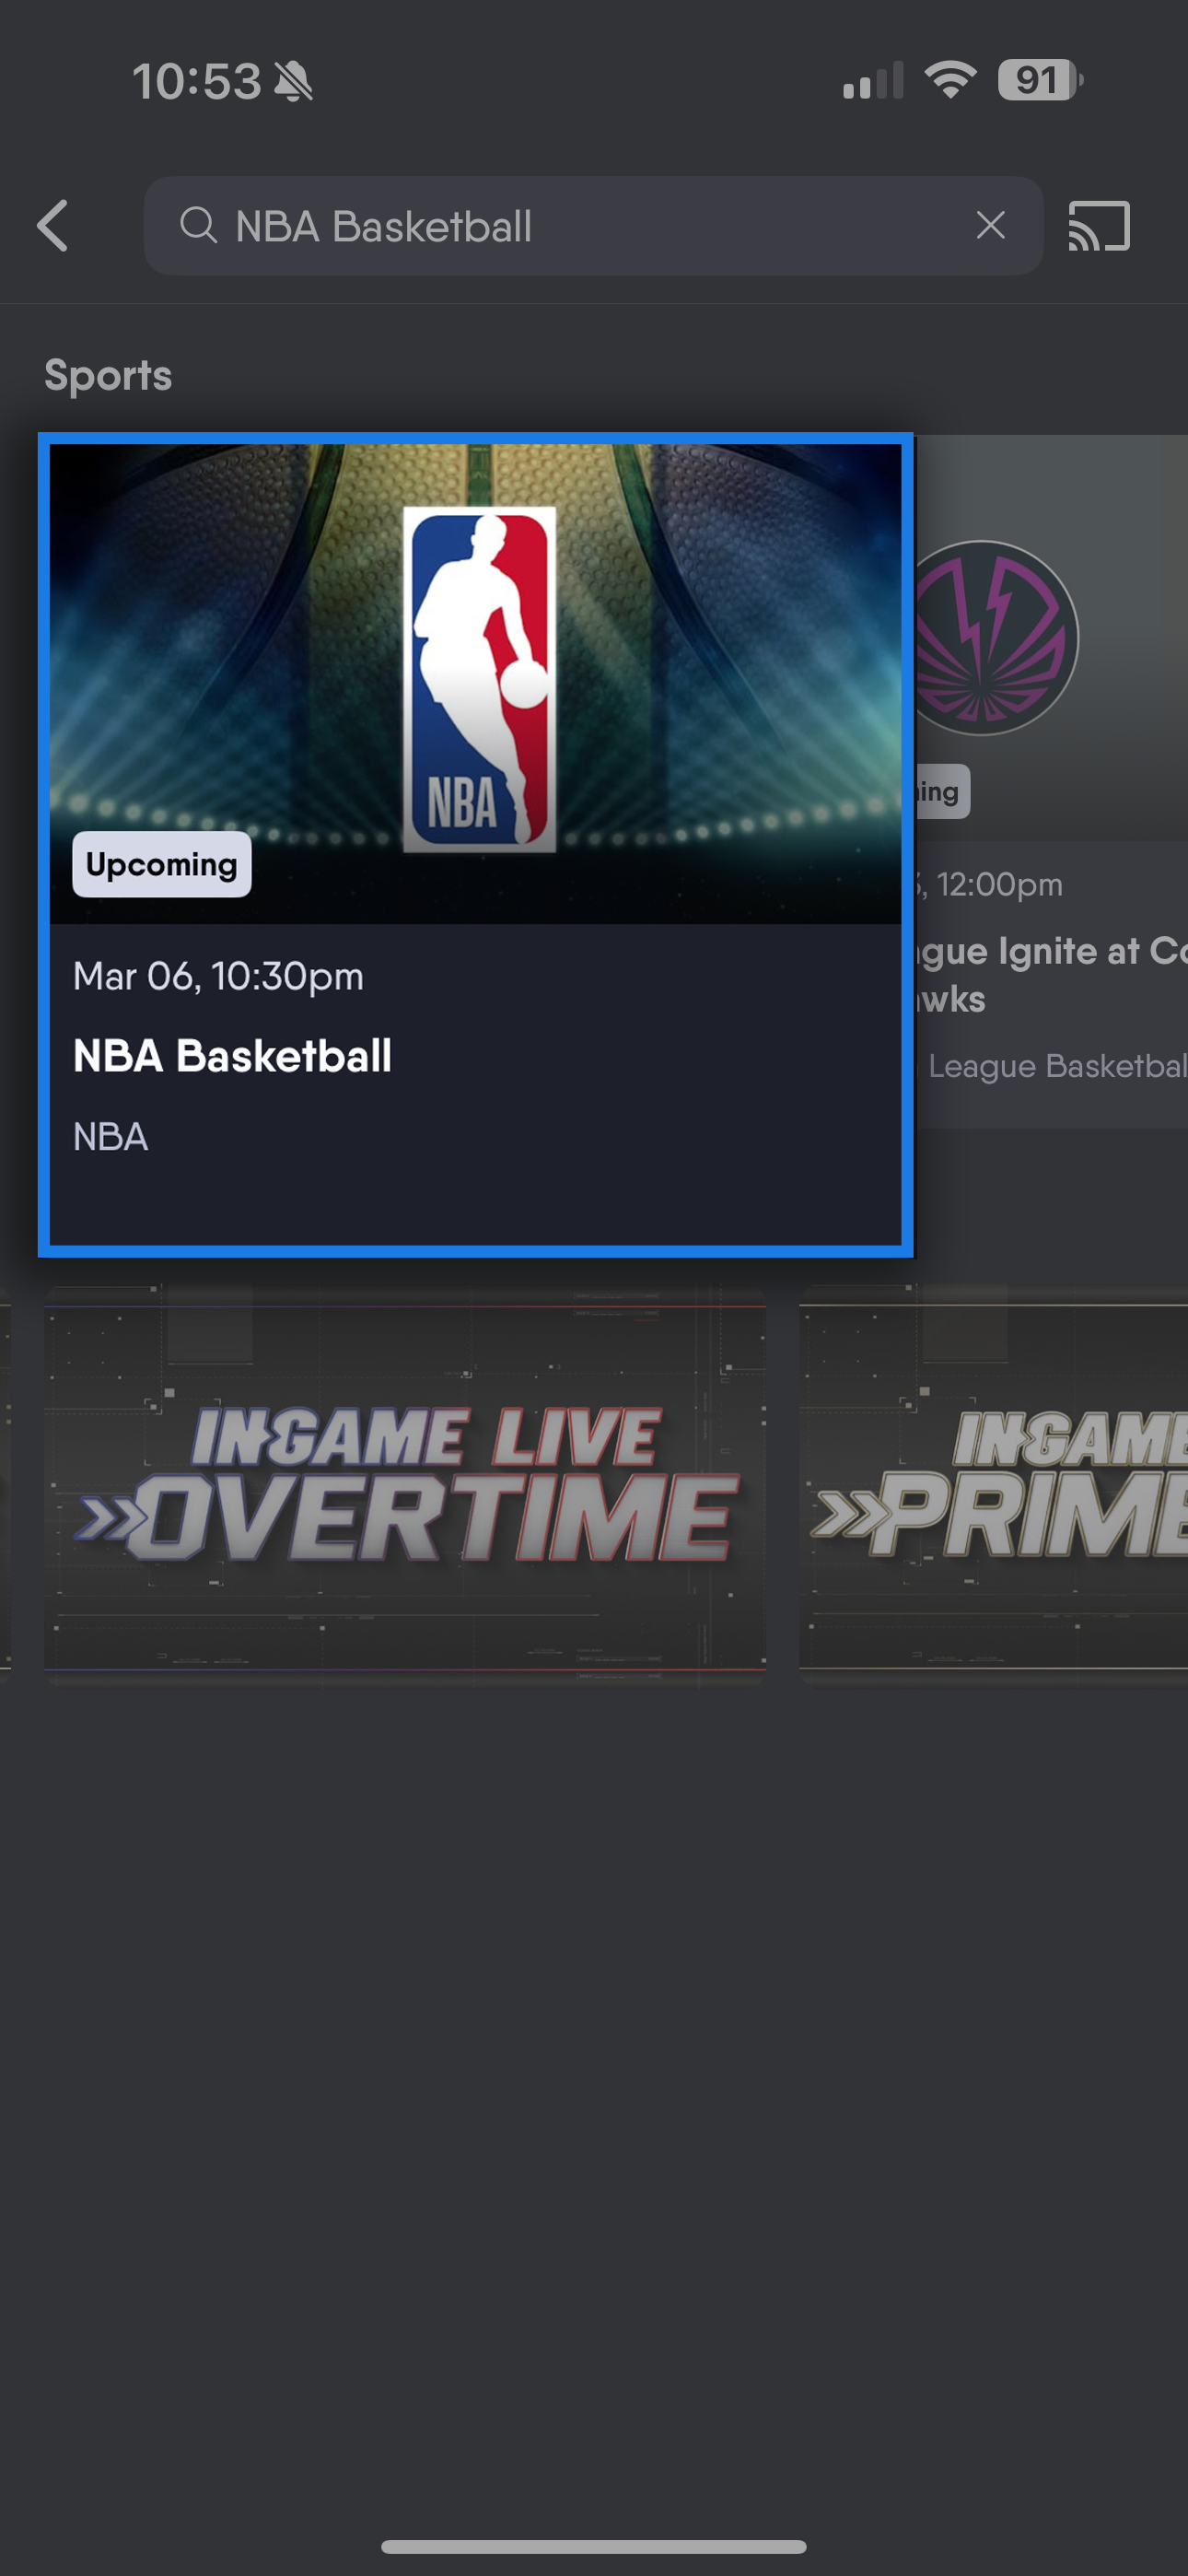 Program information screen for the selected search result from the FuboTV app on a mobile device